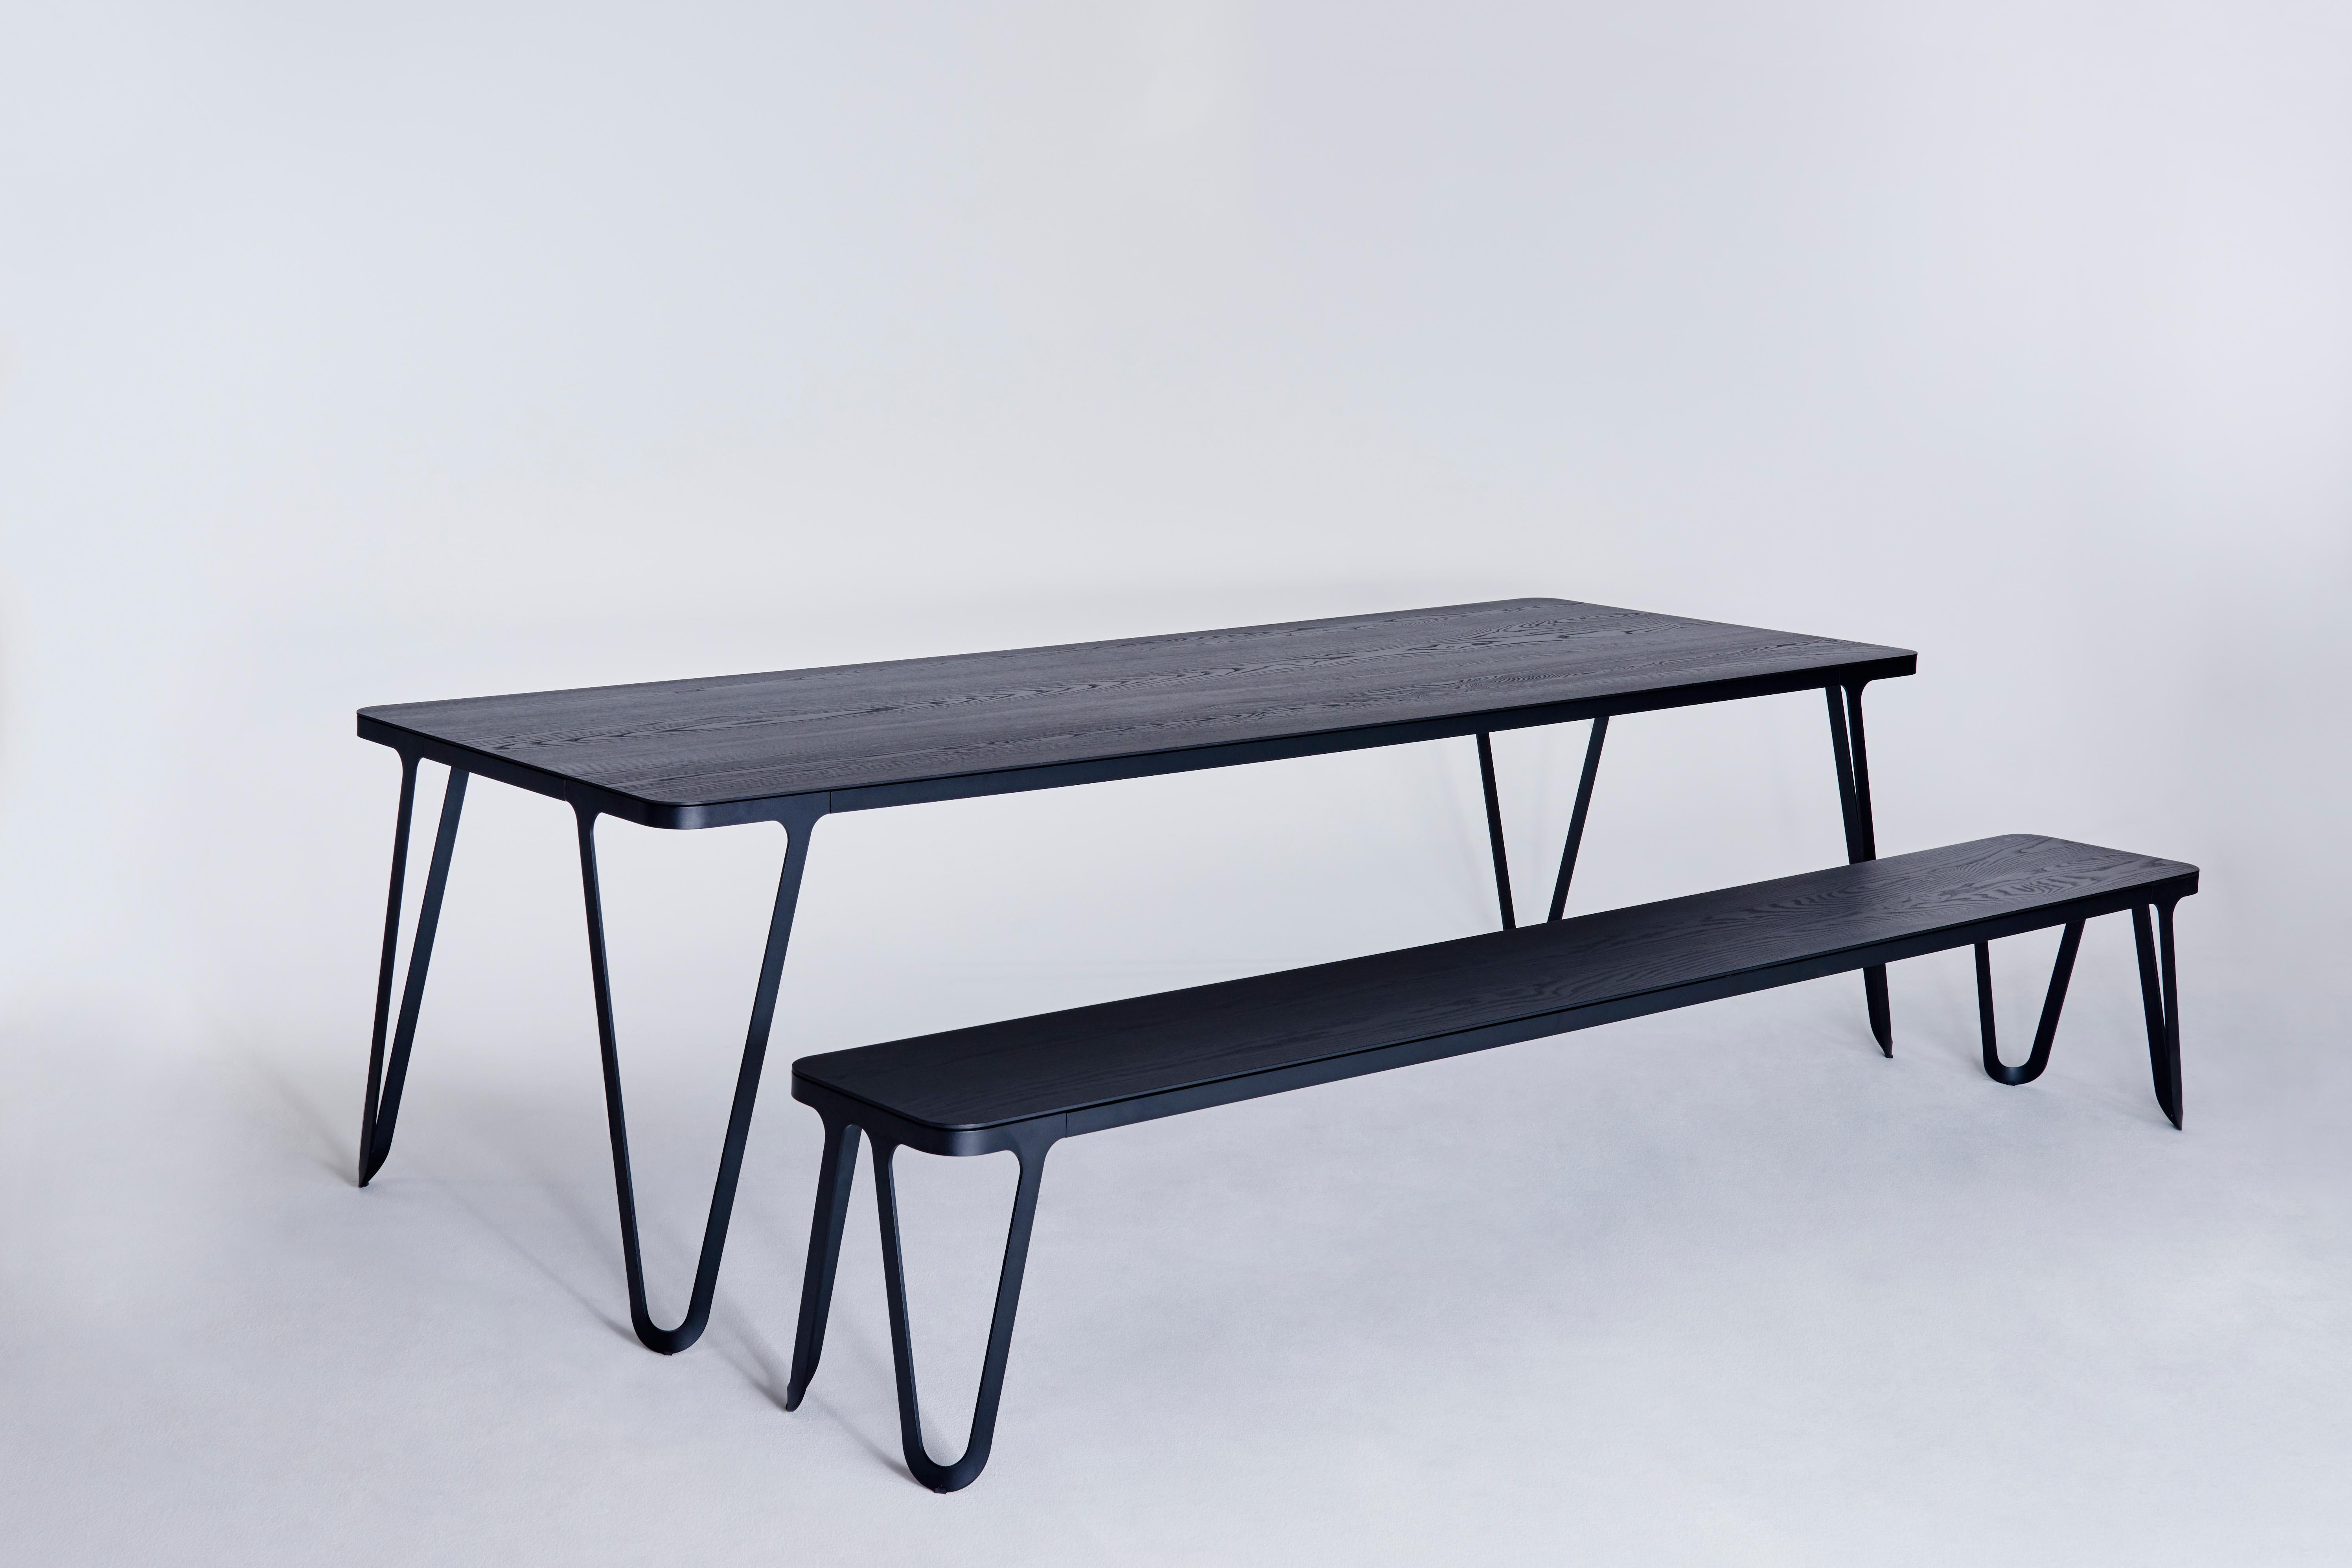 Loop table 240 ash by Sebastian Scherer
Dimensions: D 240 x W 90 x H 74 cm
Materials: oak, aluminium, wood
Weight: 69.2 kg
Also available: colours: solid wood (matt lacquered or oiled): black and white stained ash / natural oak / american